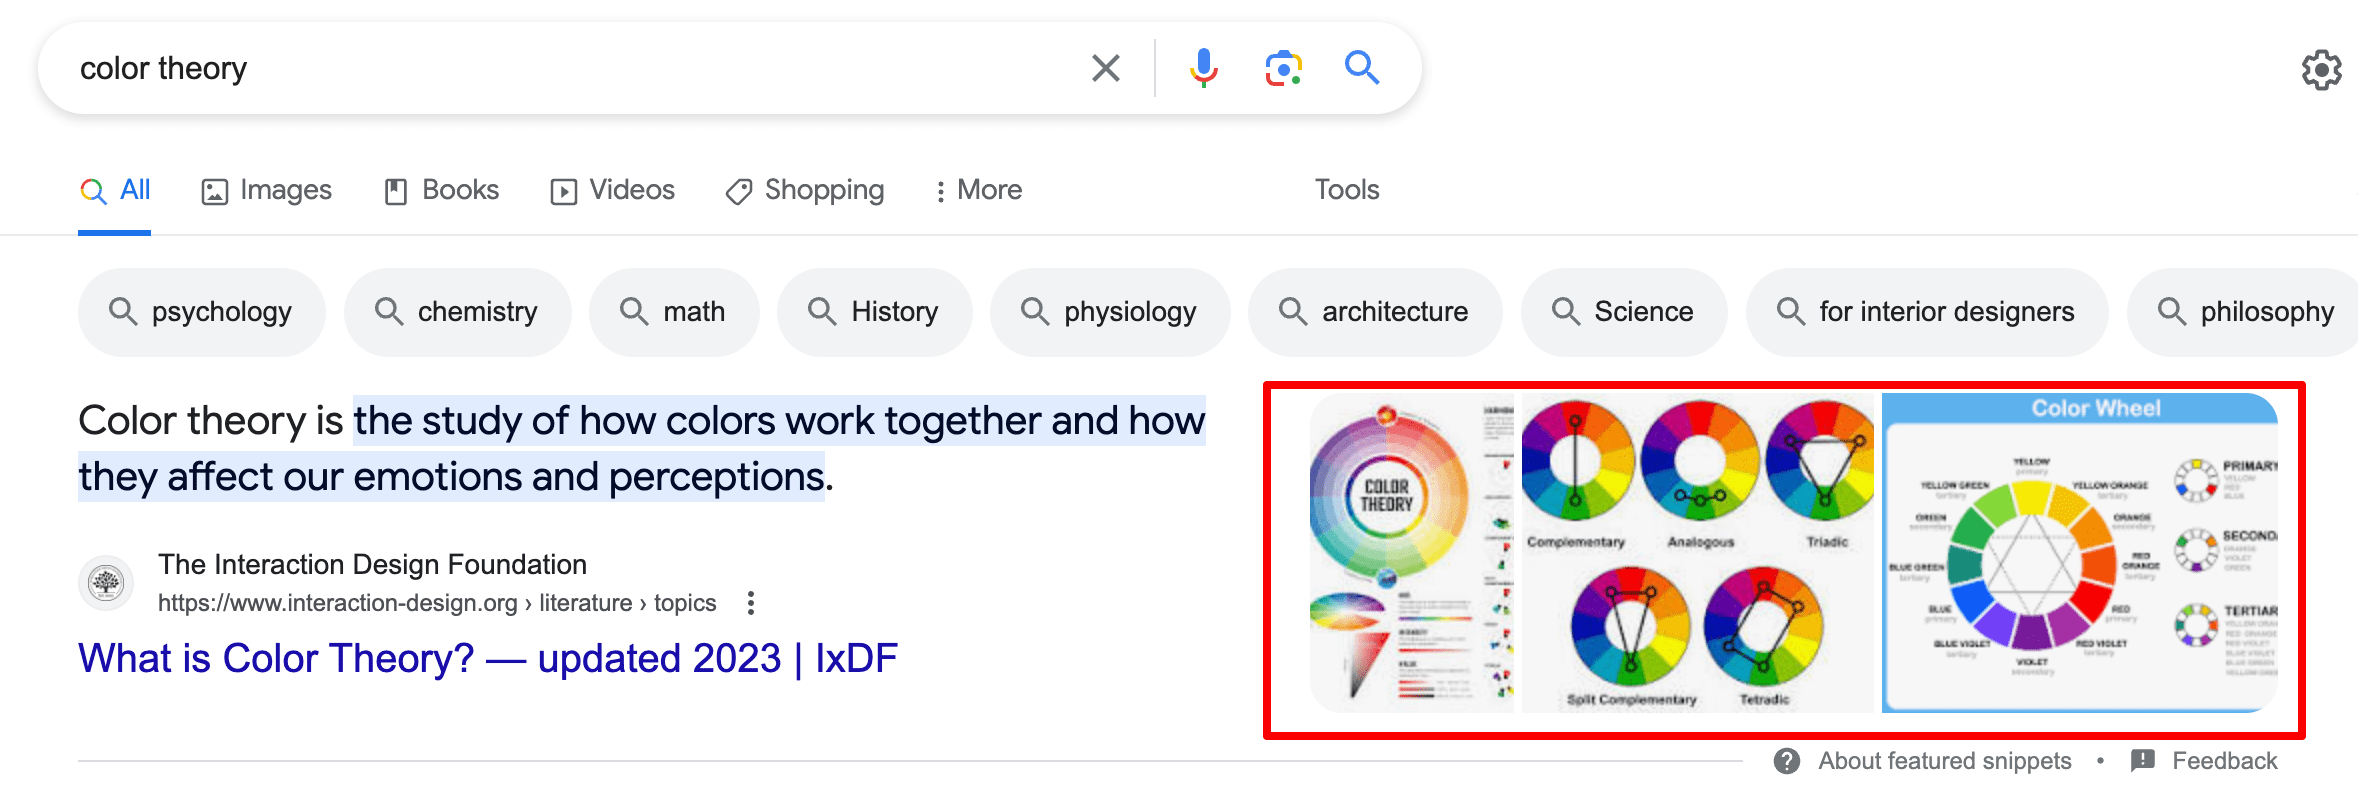 Image from other website in featured snippet